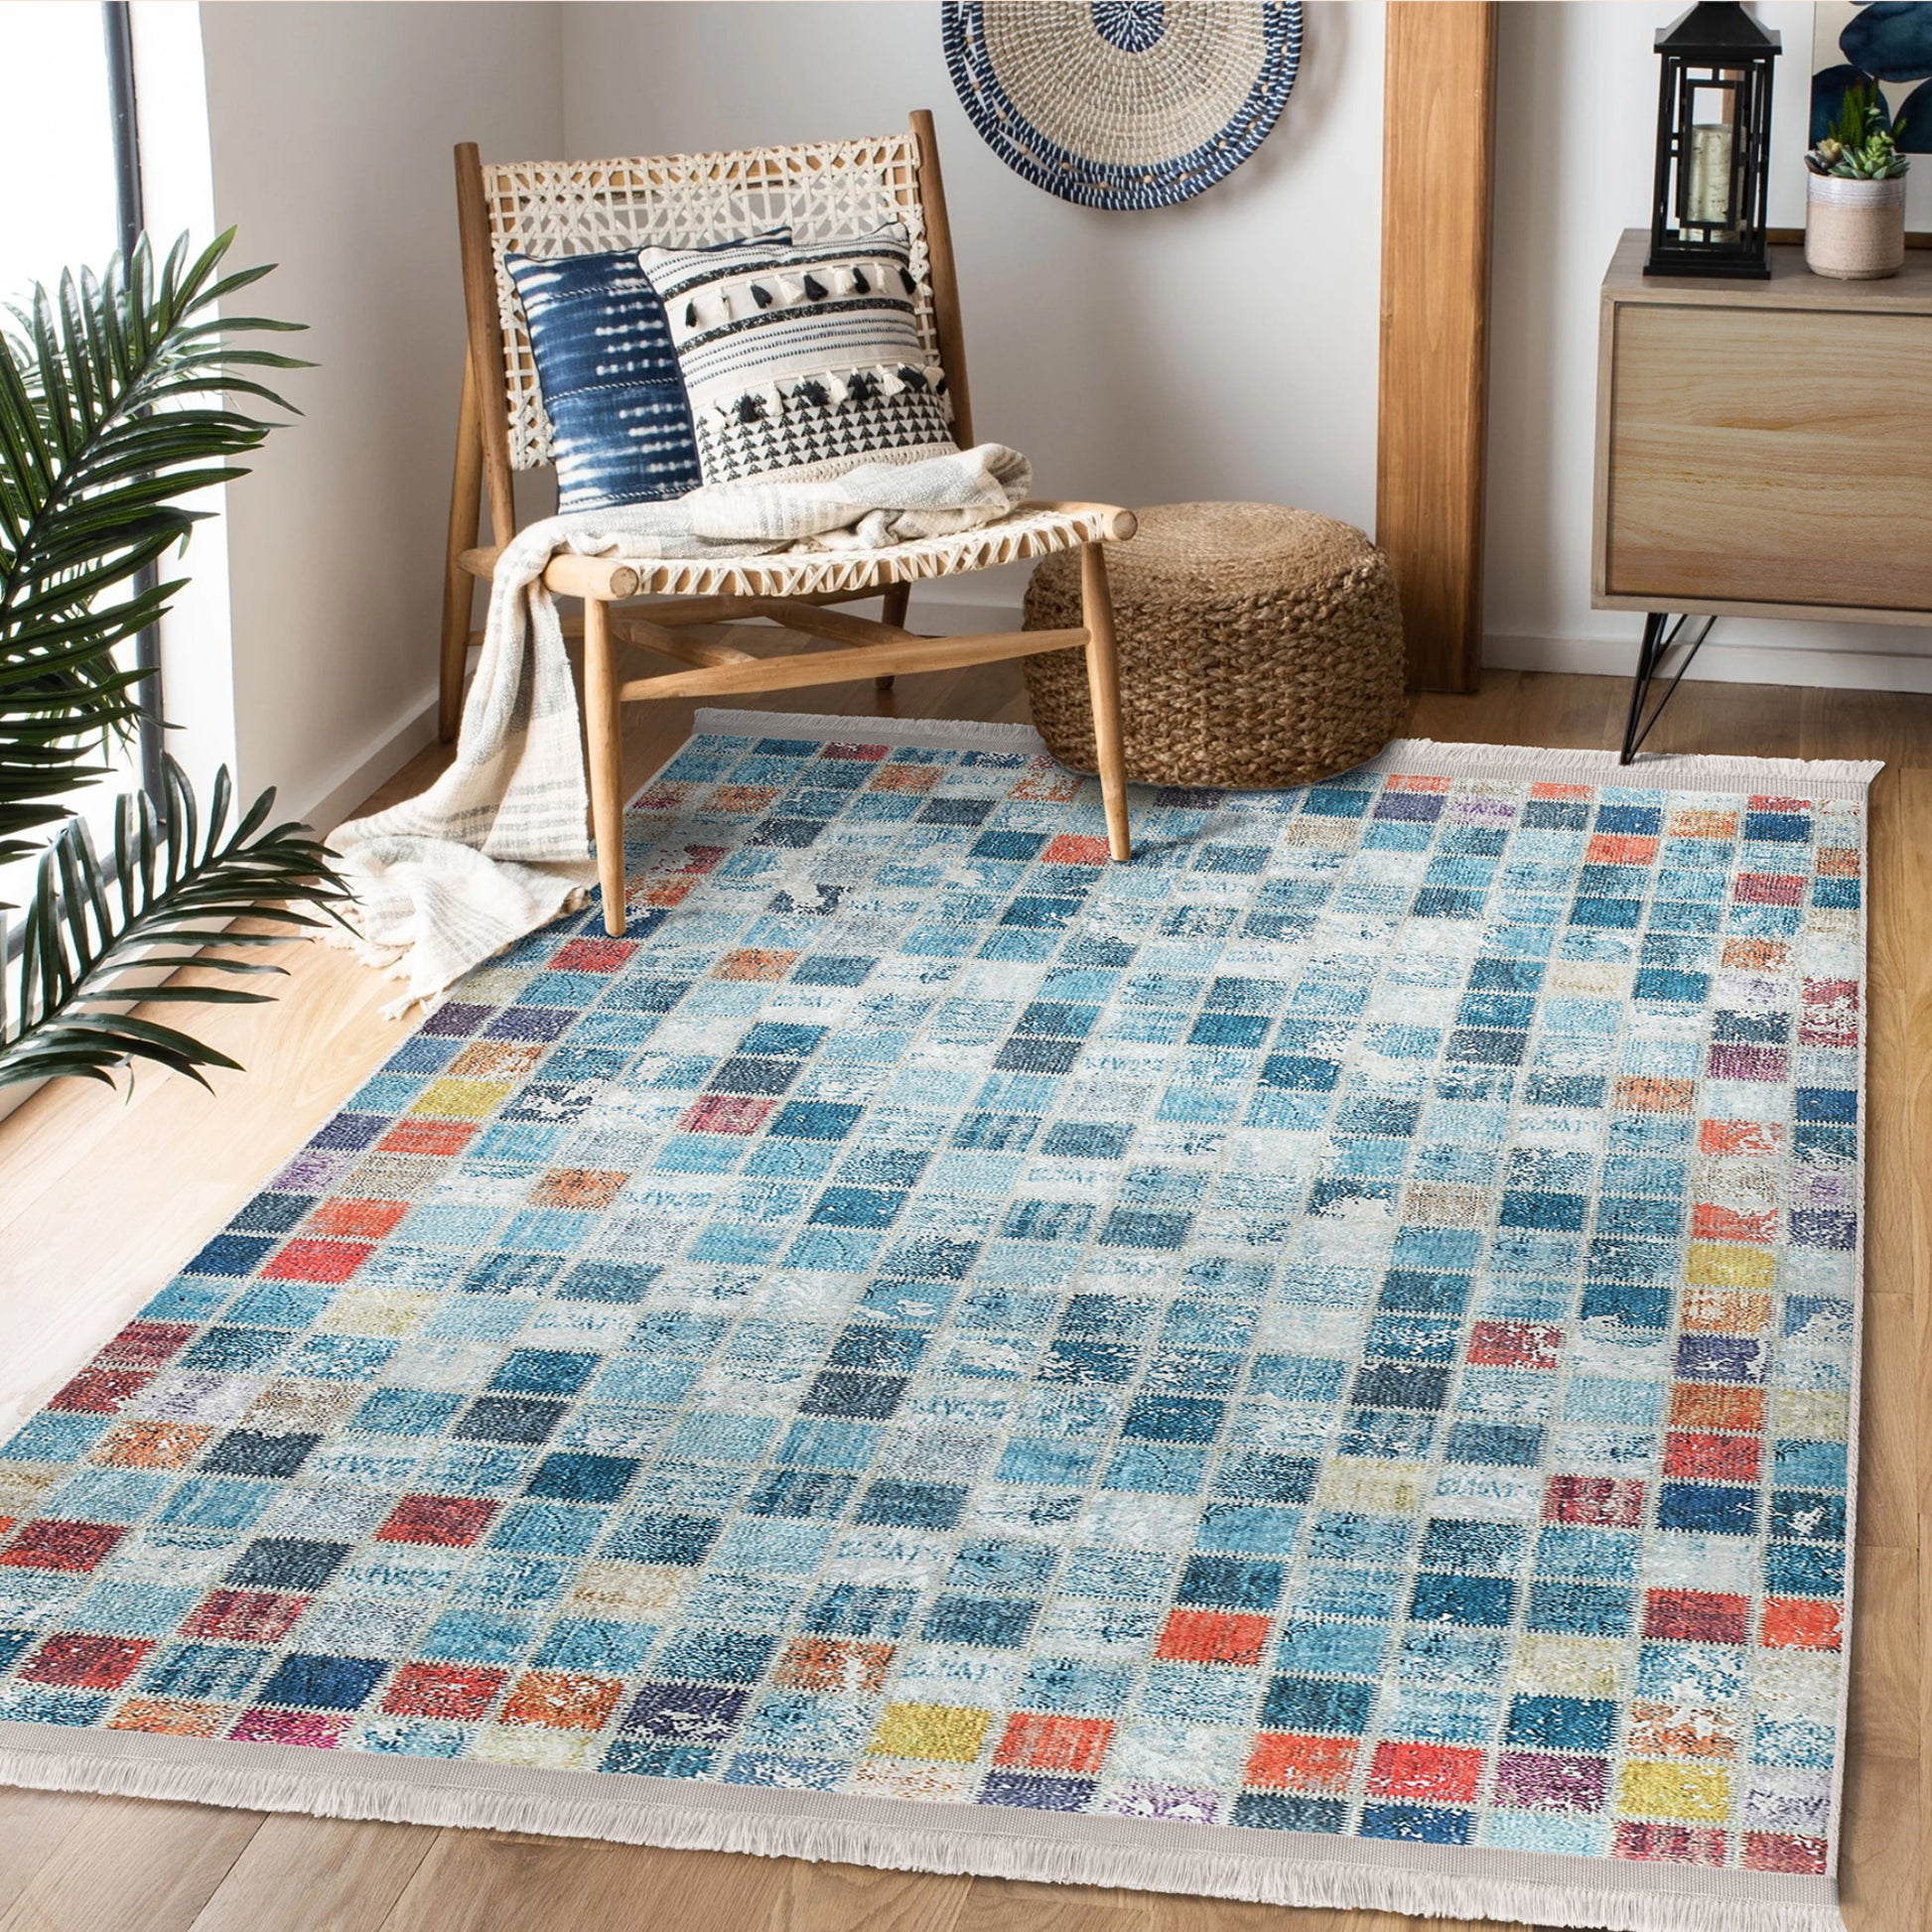 Checkered Patterned Rug for Vintage Country Interior